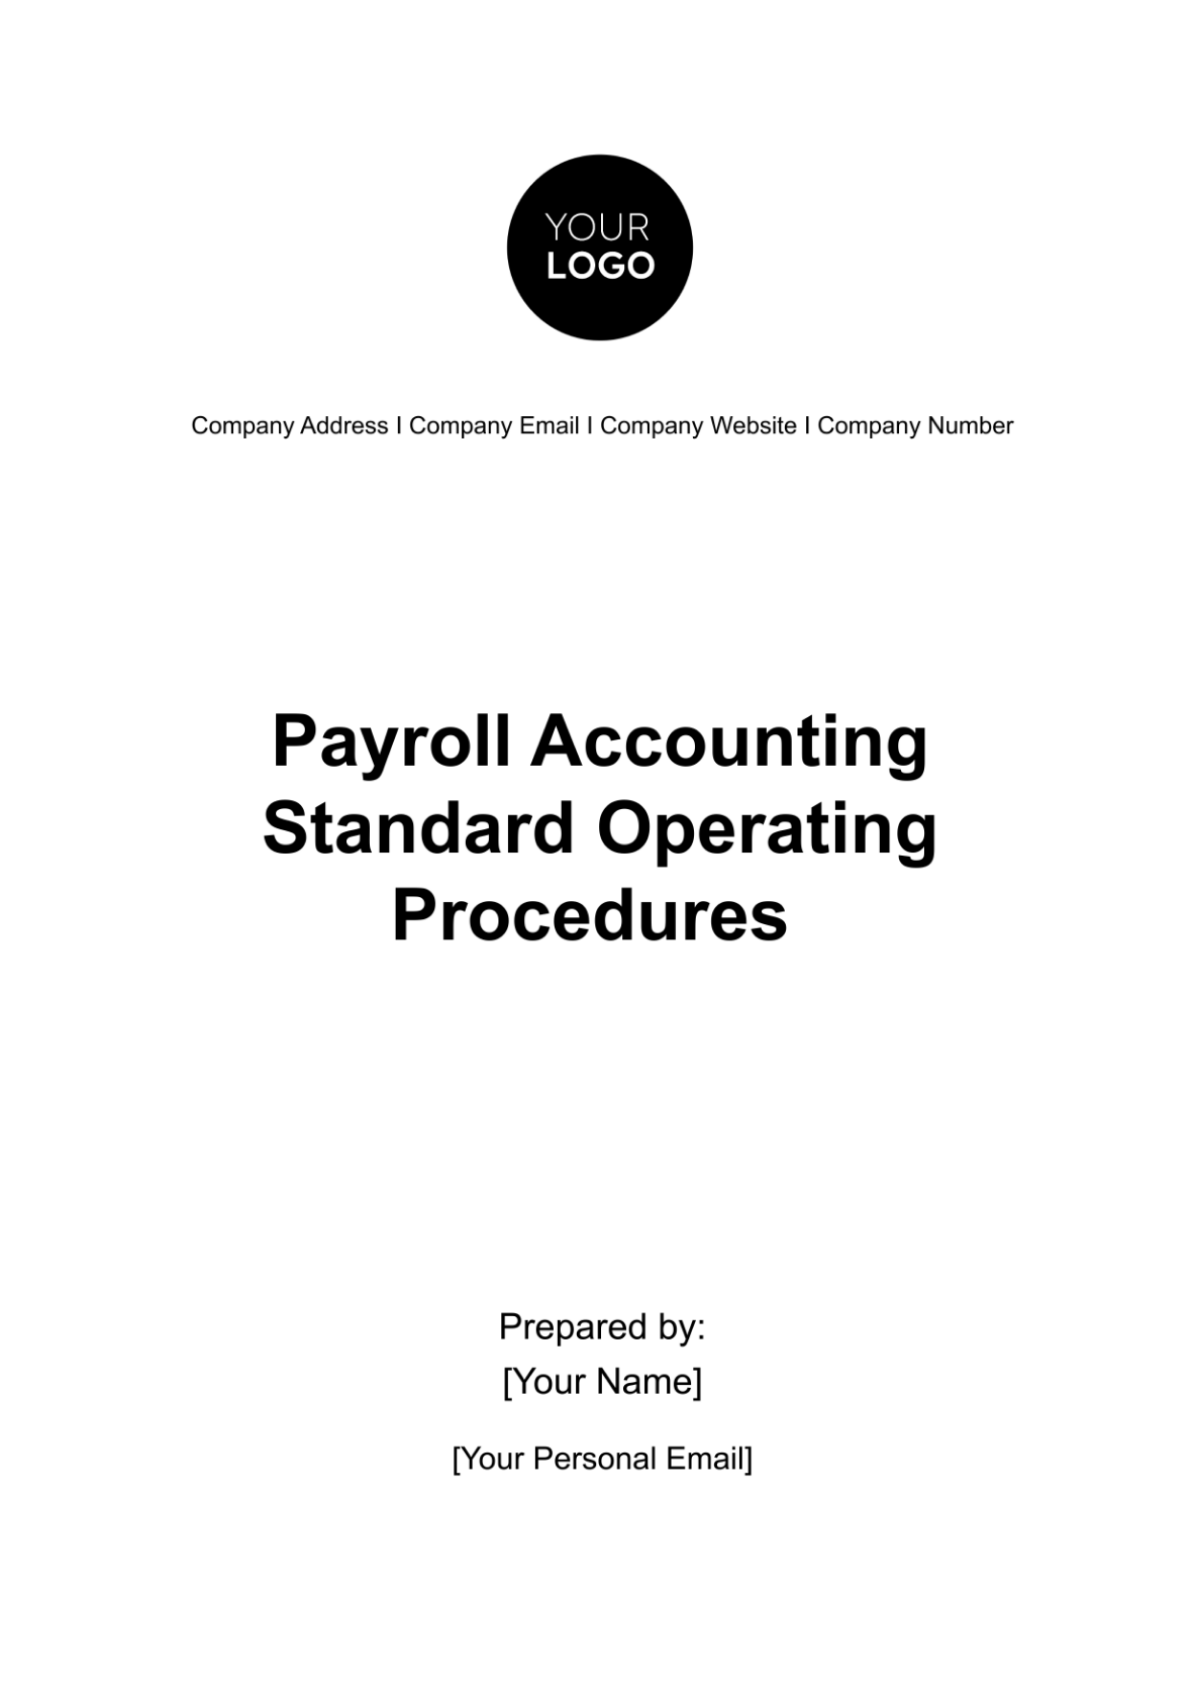 Payroll Accounting Standard Operating Procedures Template